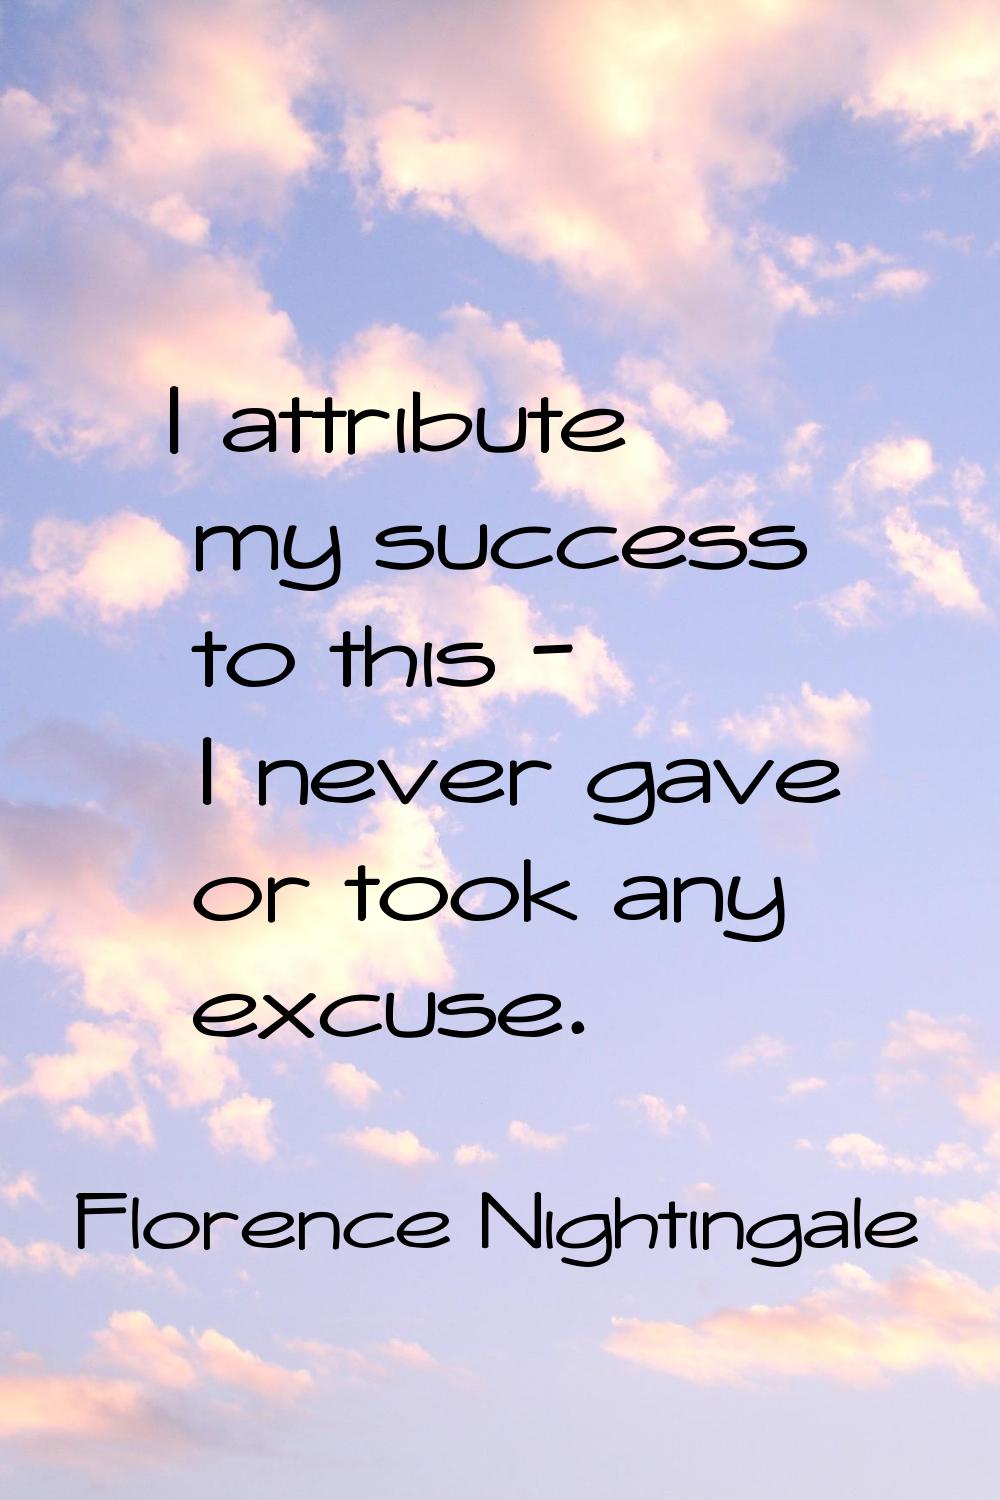 I attribute my success to this - I never gave or took any excuse.